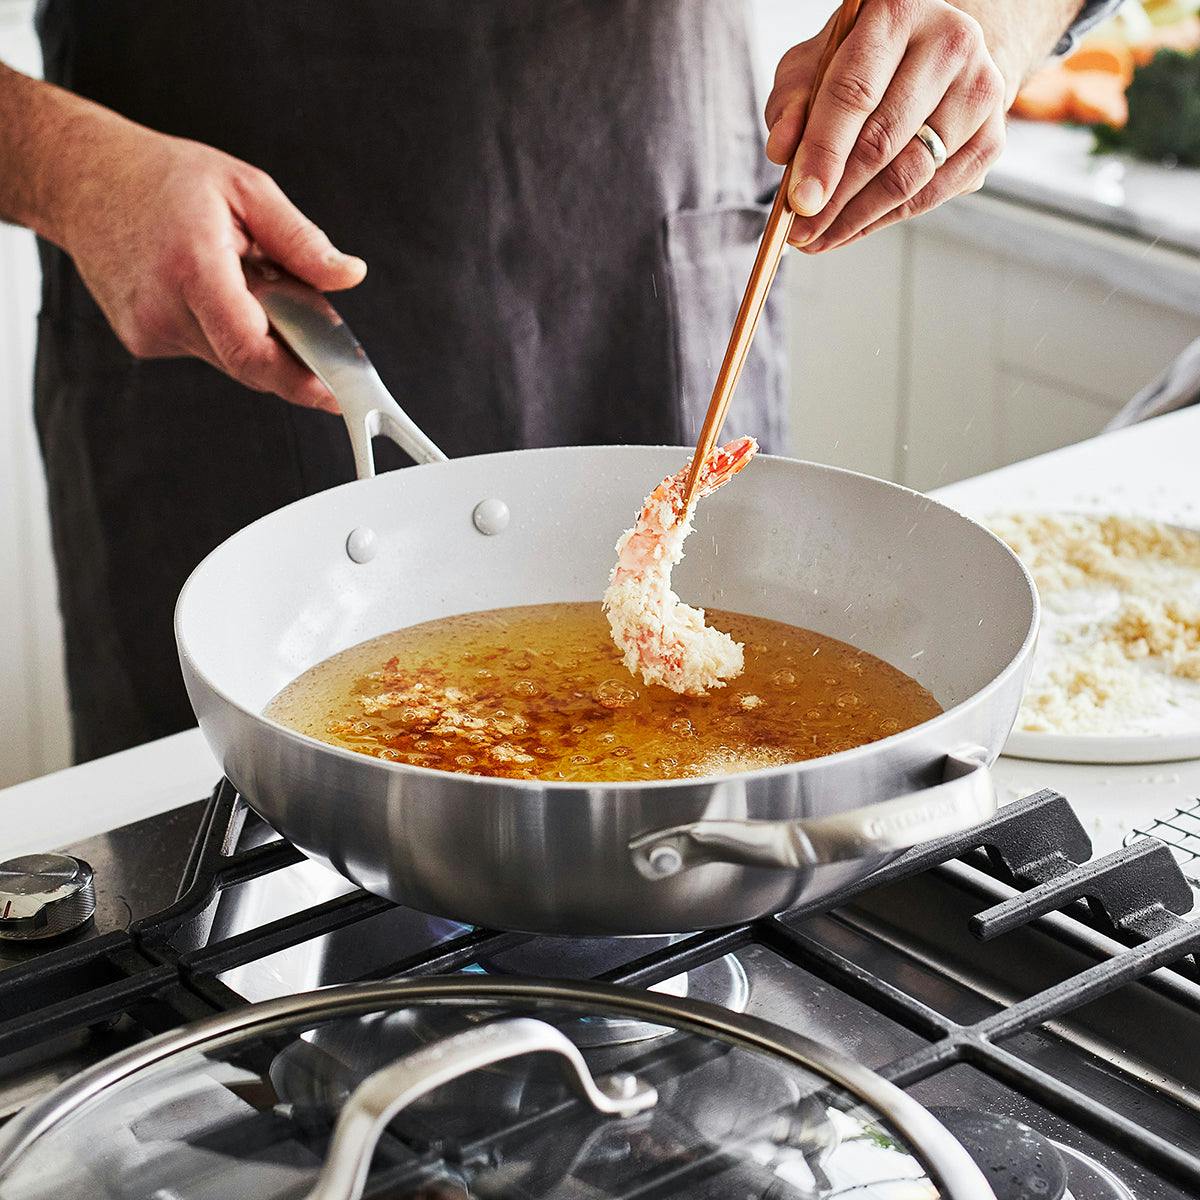 The GreenPan Ceramic Nonstick Skillet Is 33% Off at